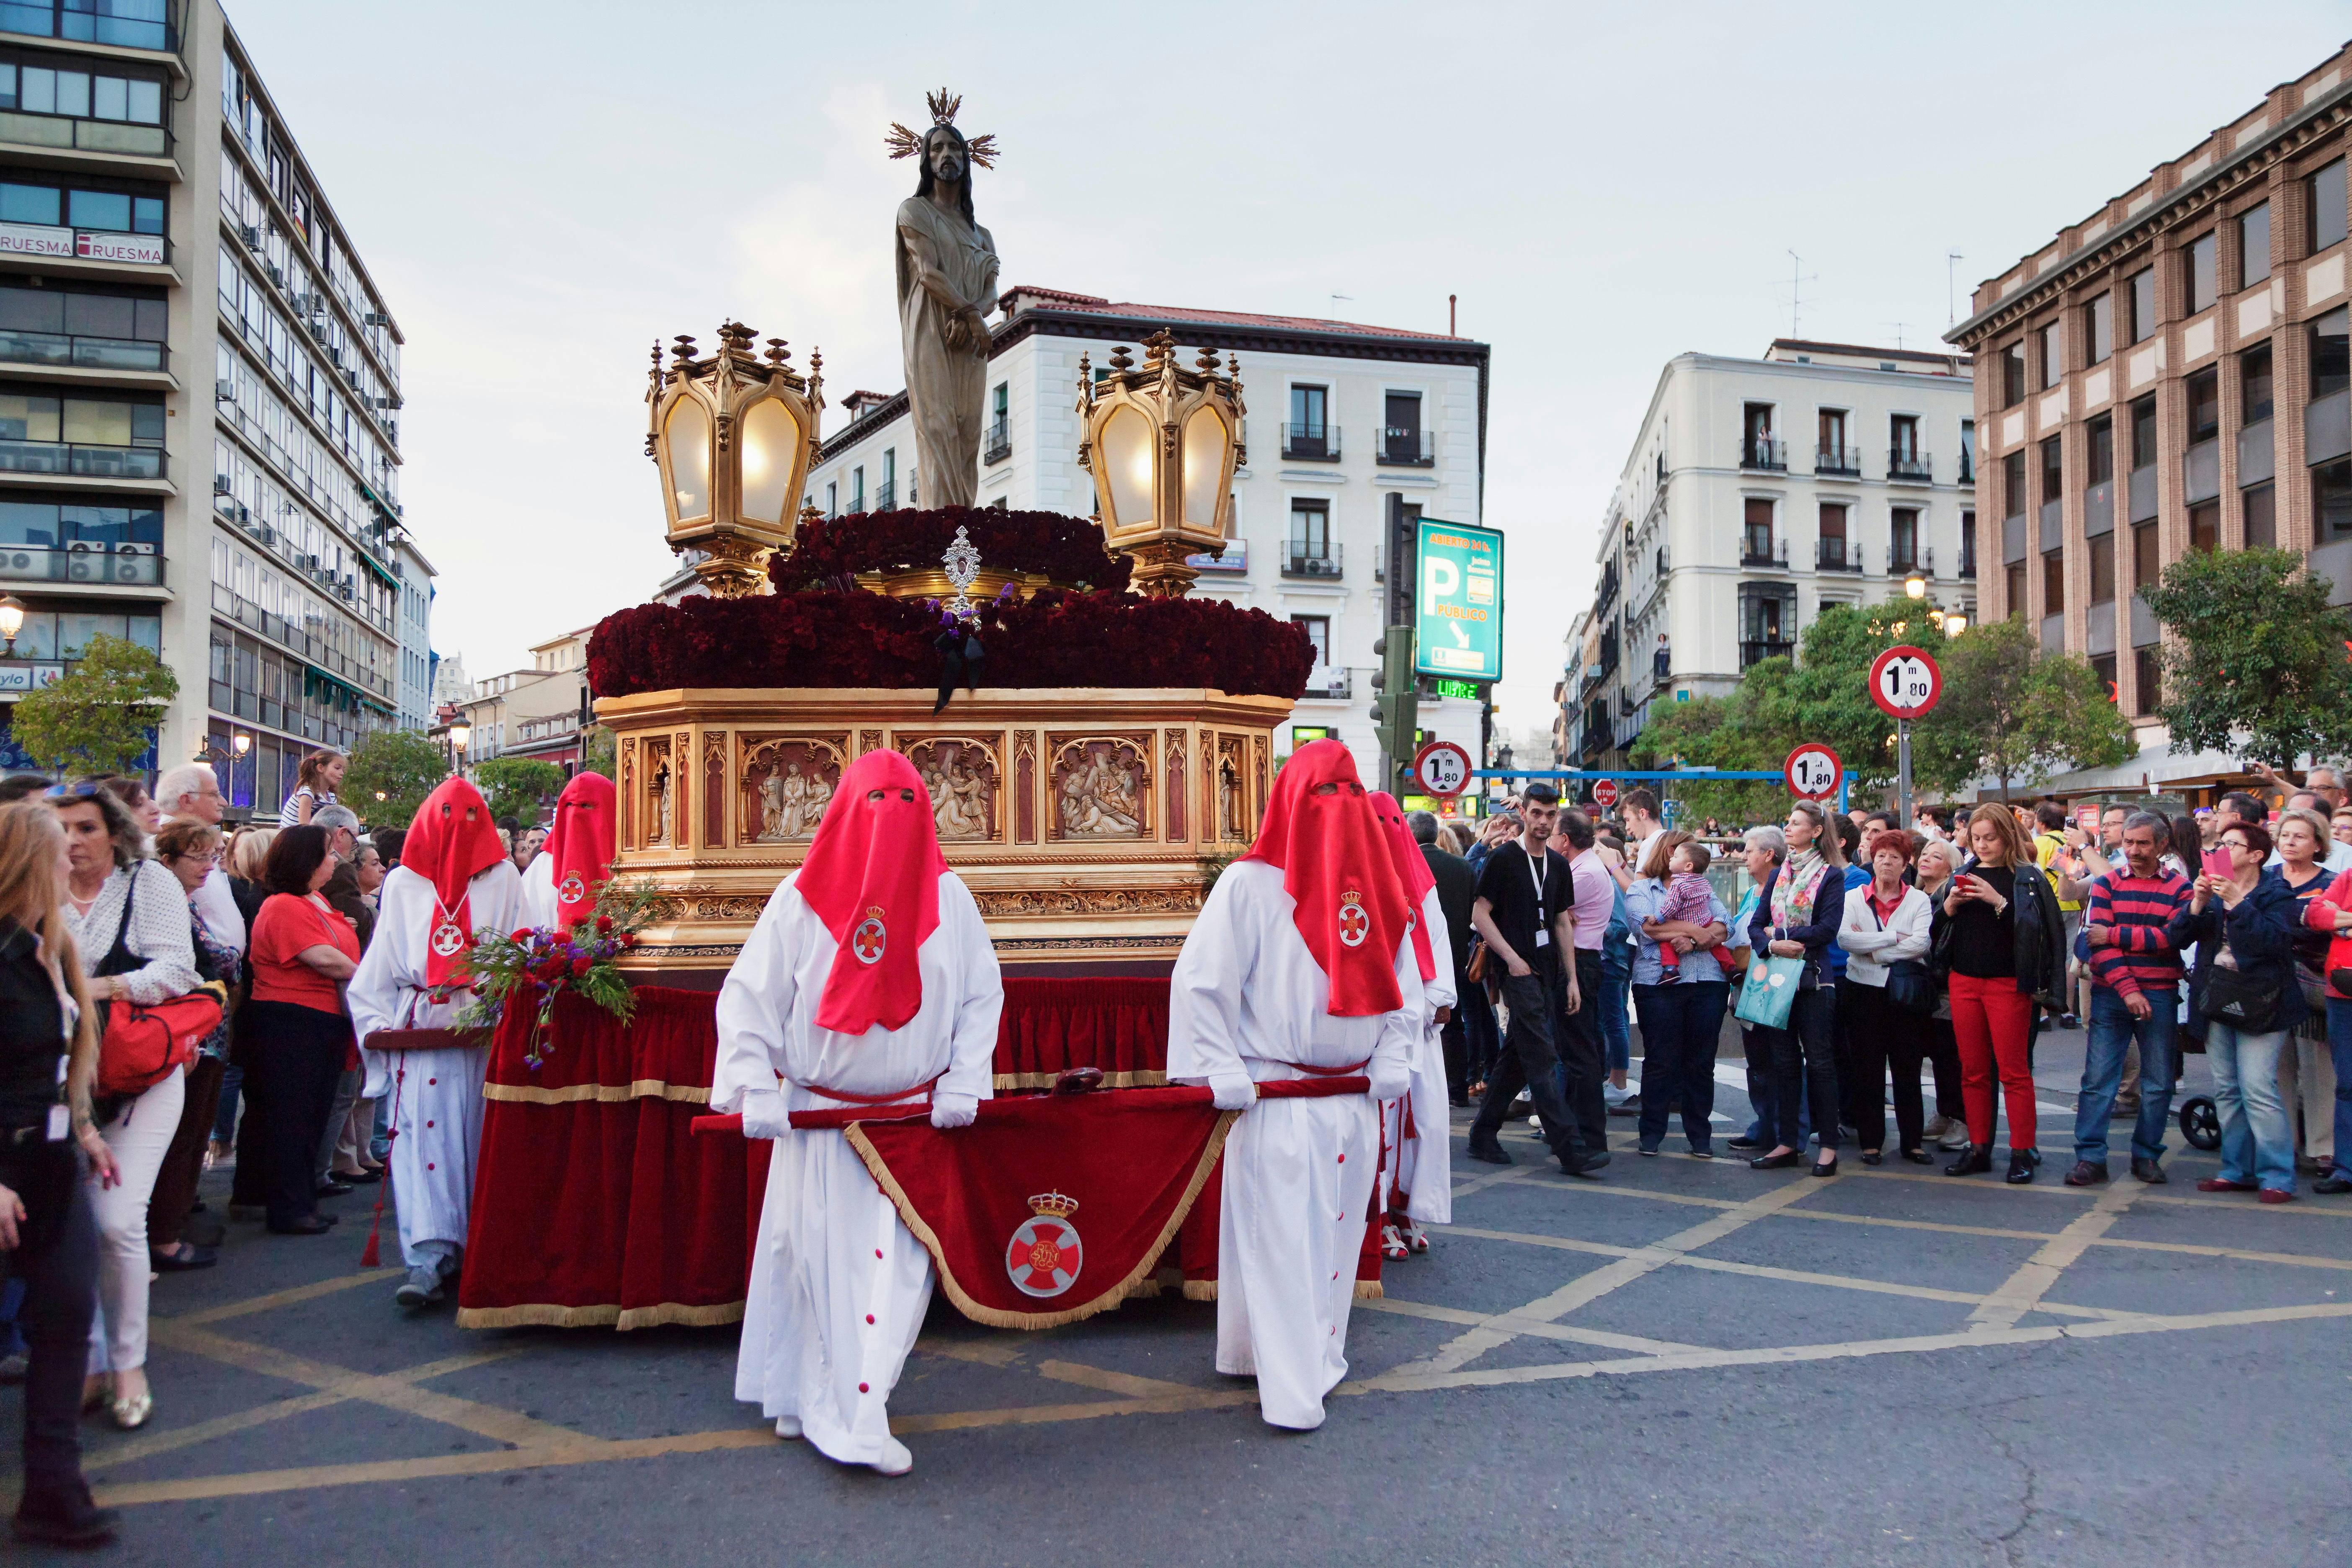 People parading through the streets dressed in white robes with red hoods covering their faces during Semana Santa in Madrid, Spain.